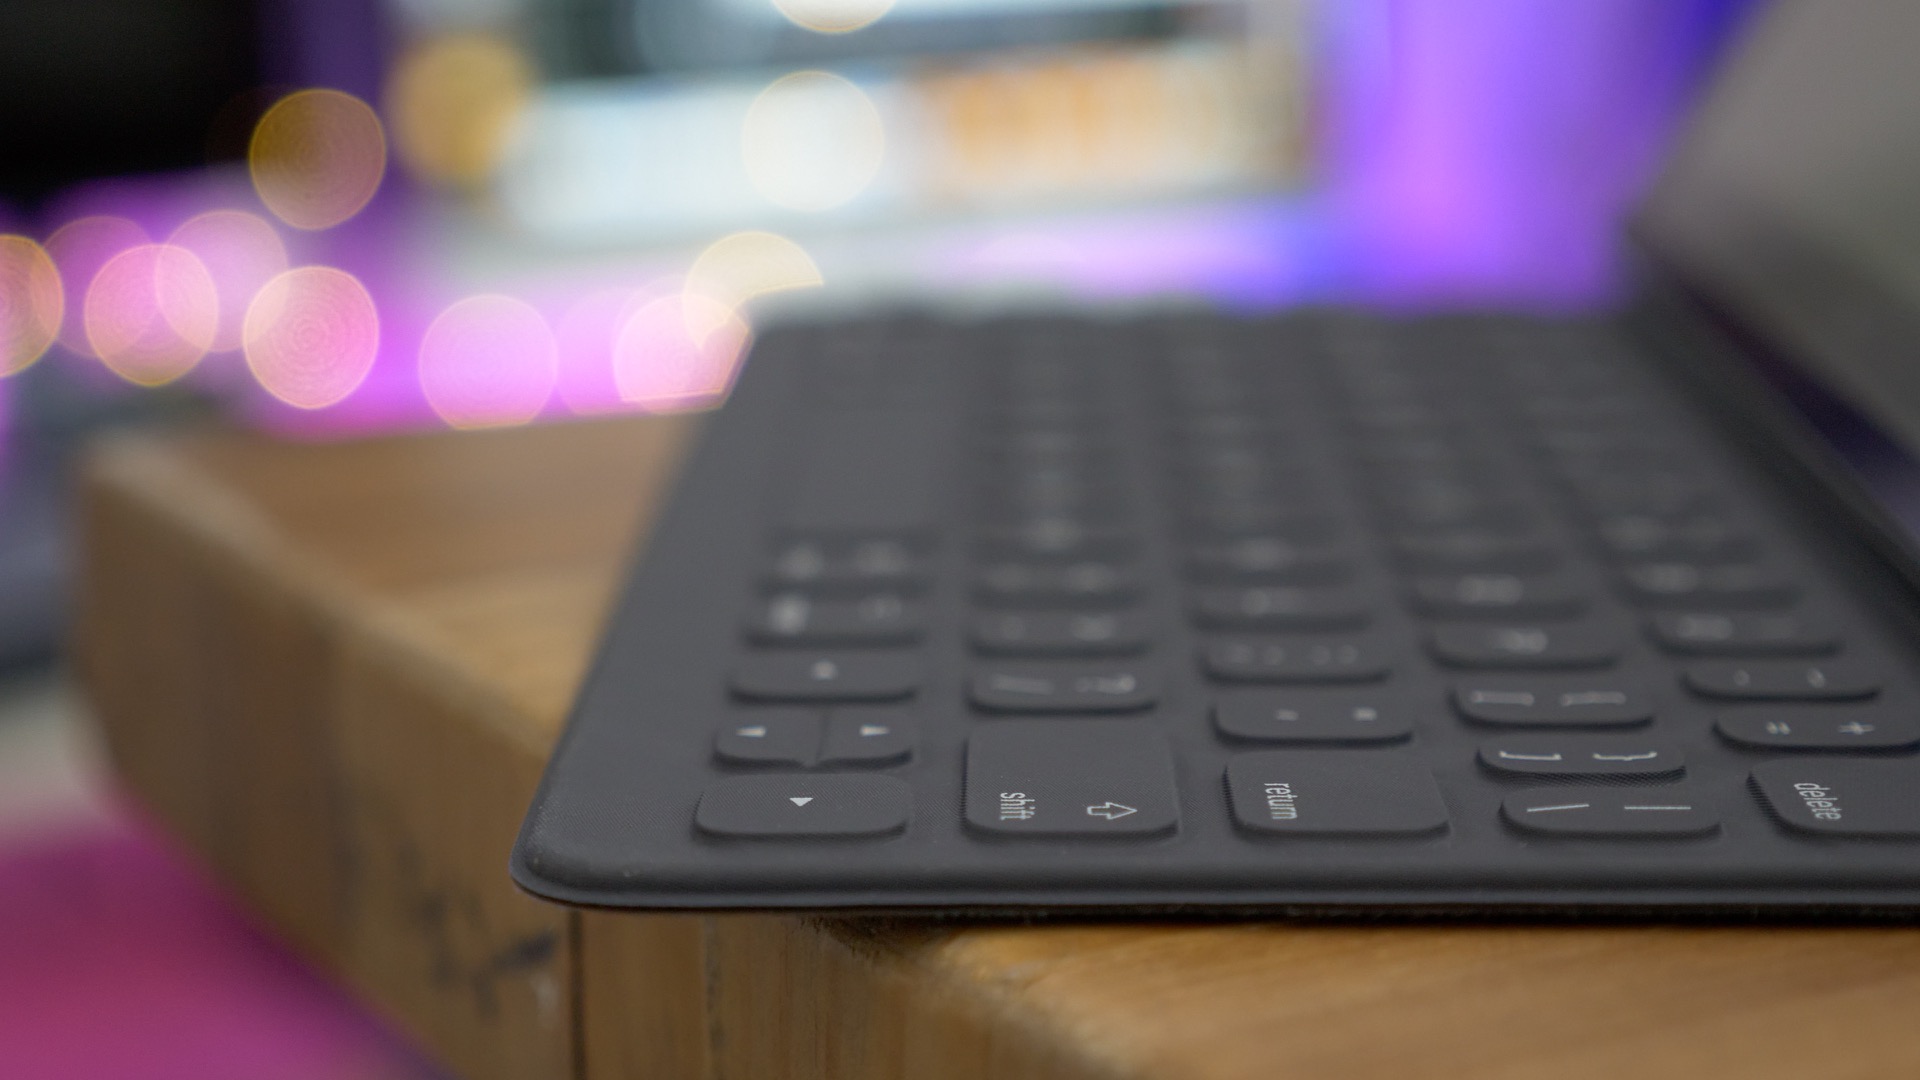 The Smart Keyboard makes the 10.5-inch iPad Pro a better